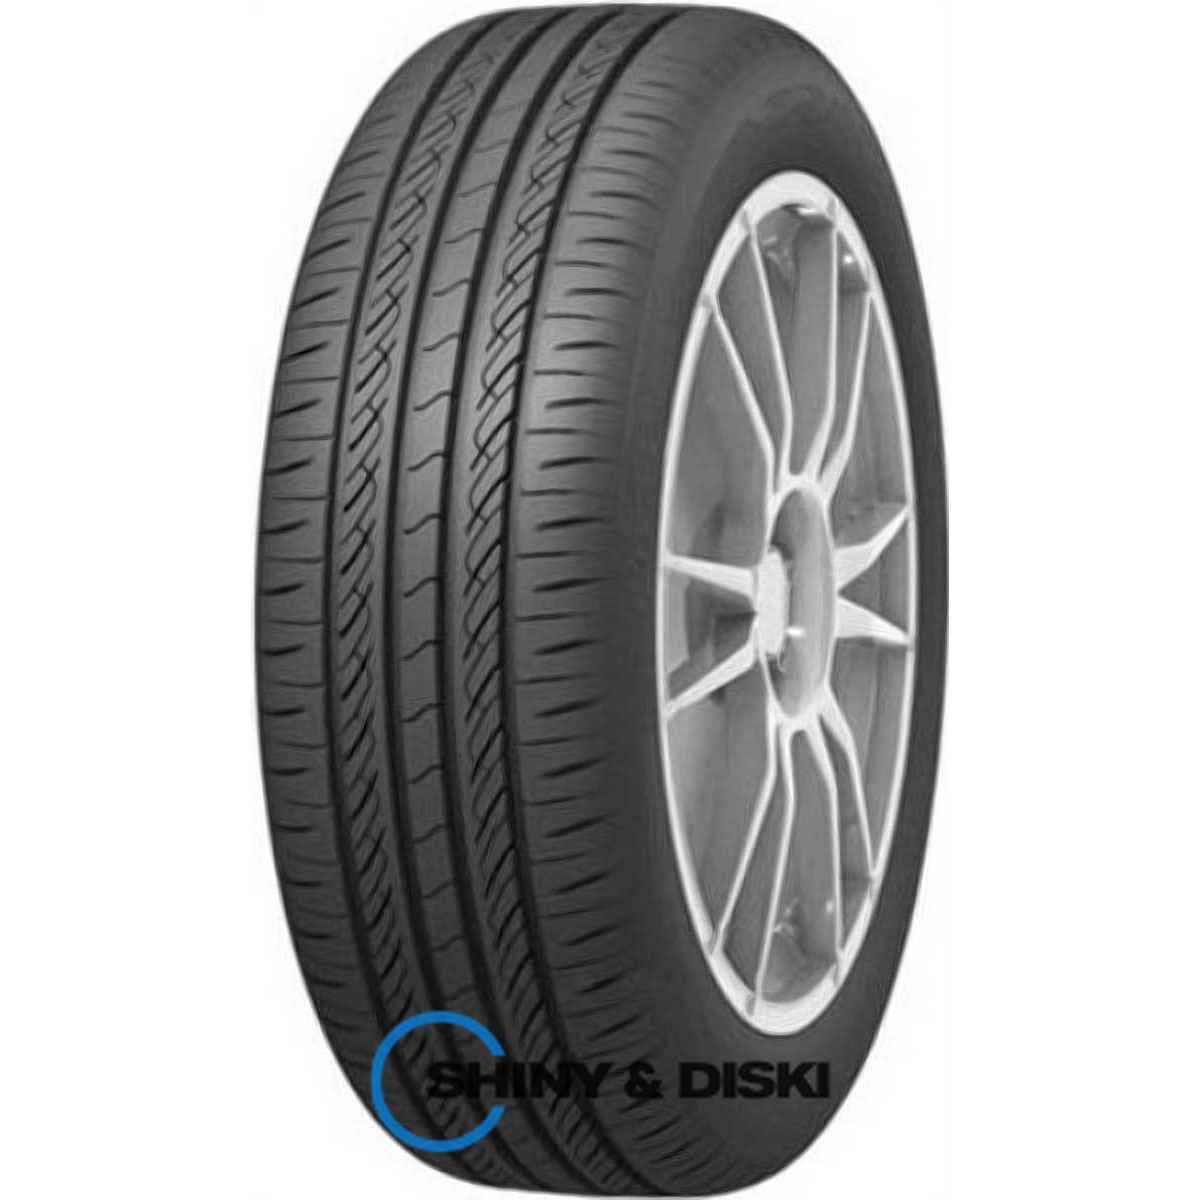 infinity ecosis 185/65 r15 88t